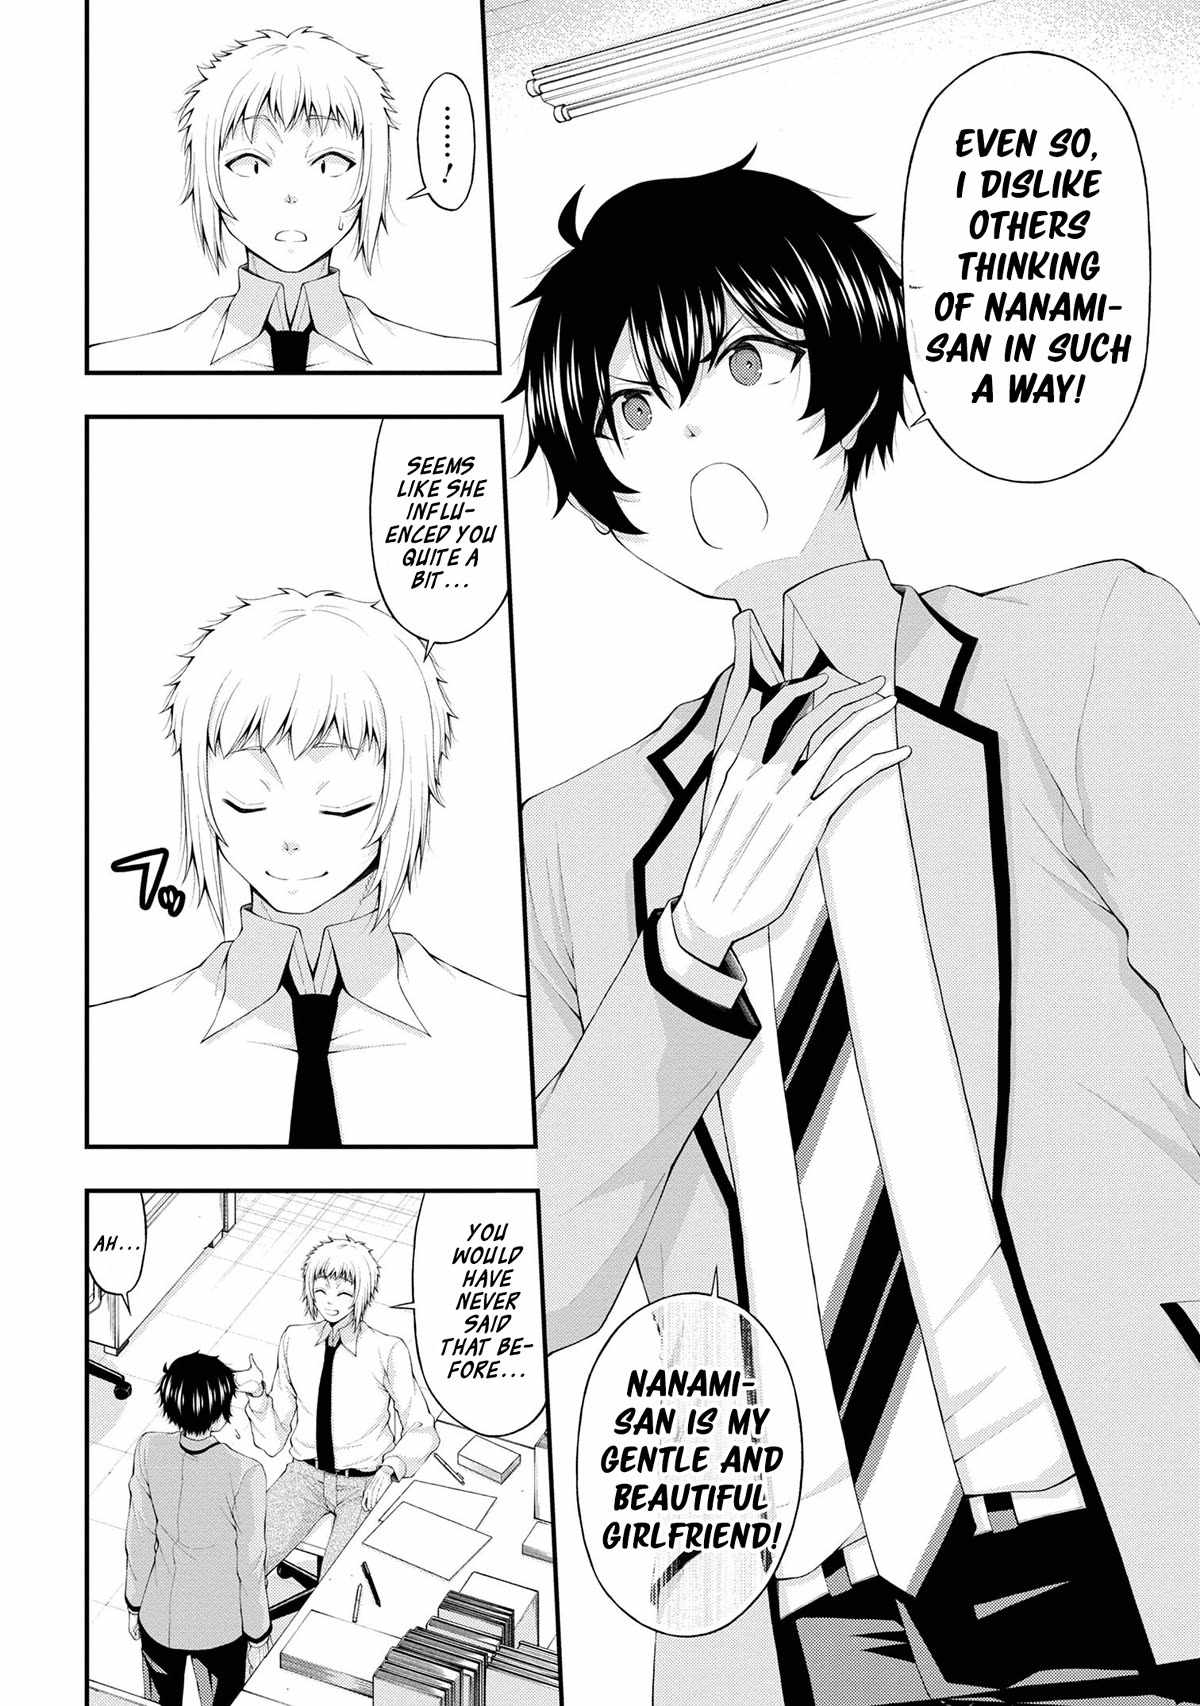 The Gal Who Was Meant to Confess to Me as a Game Punishment Has Apparently Fallen in Love with Me Chapter 13-eng-li - Page 3